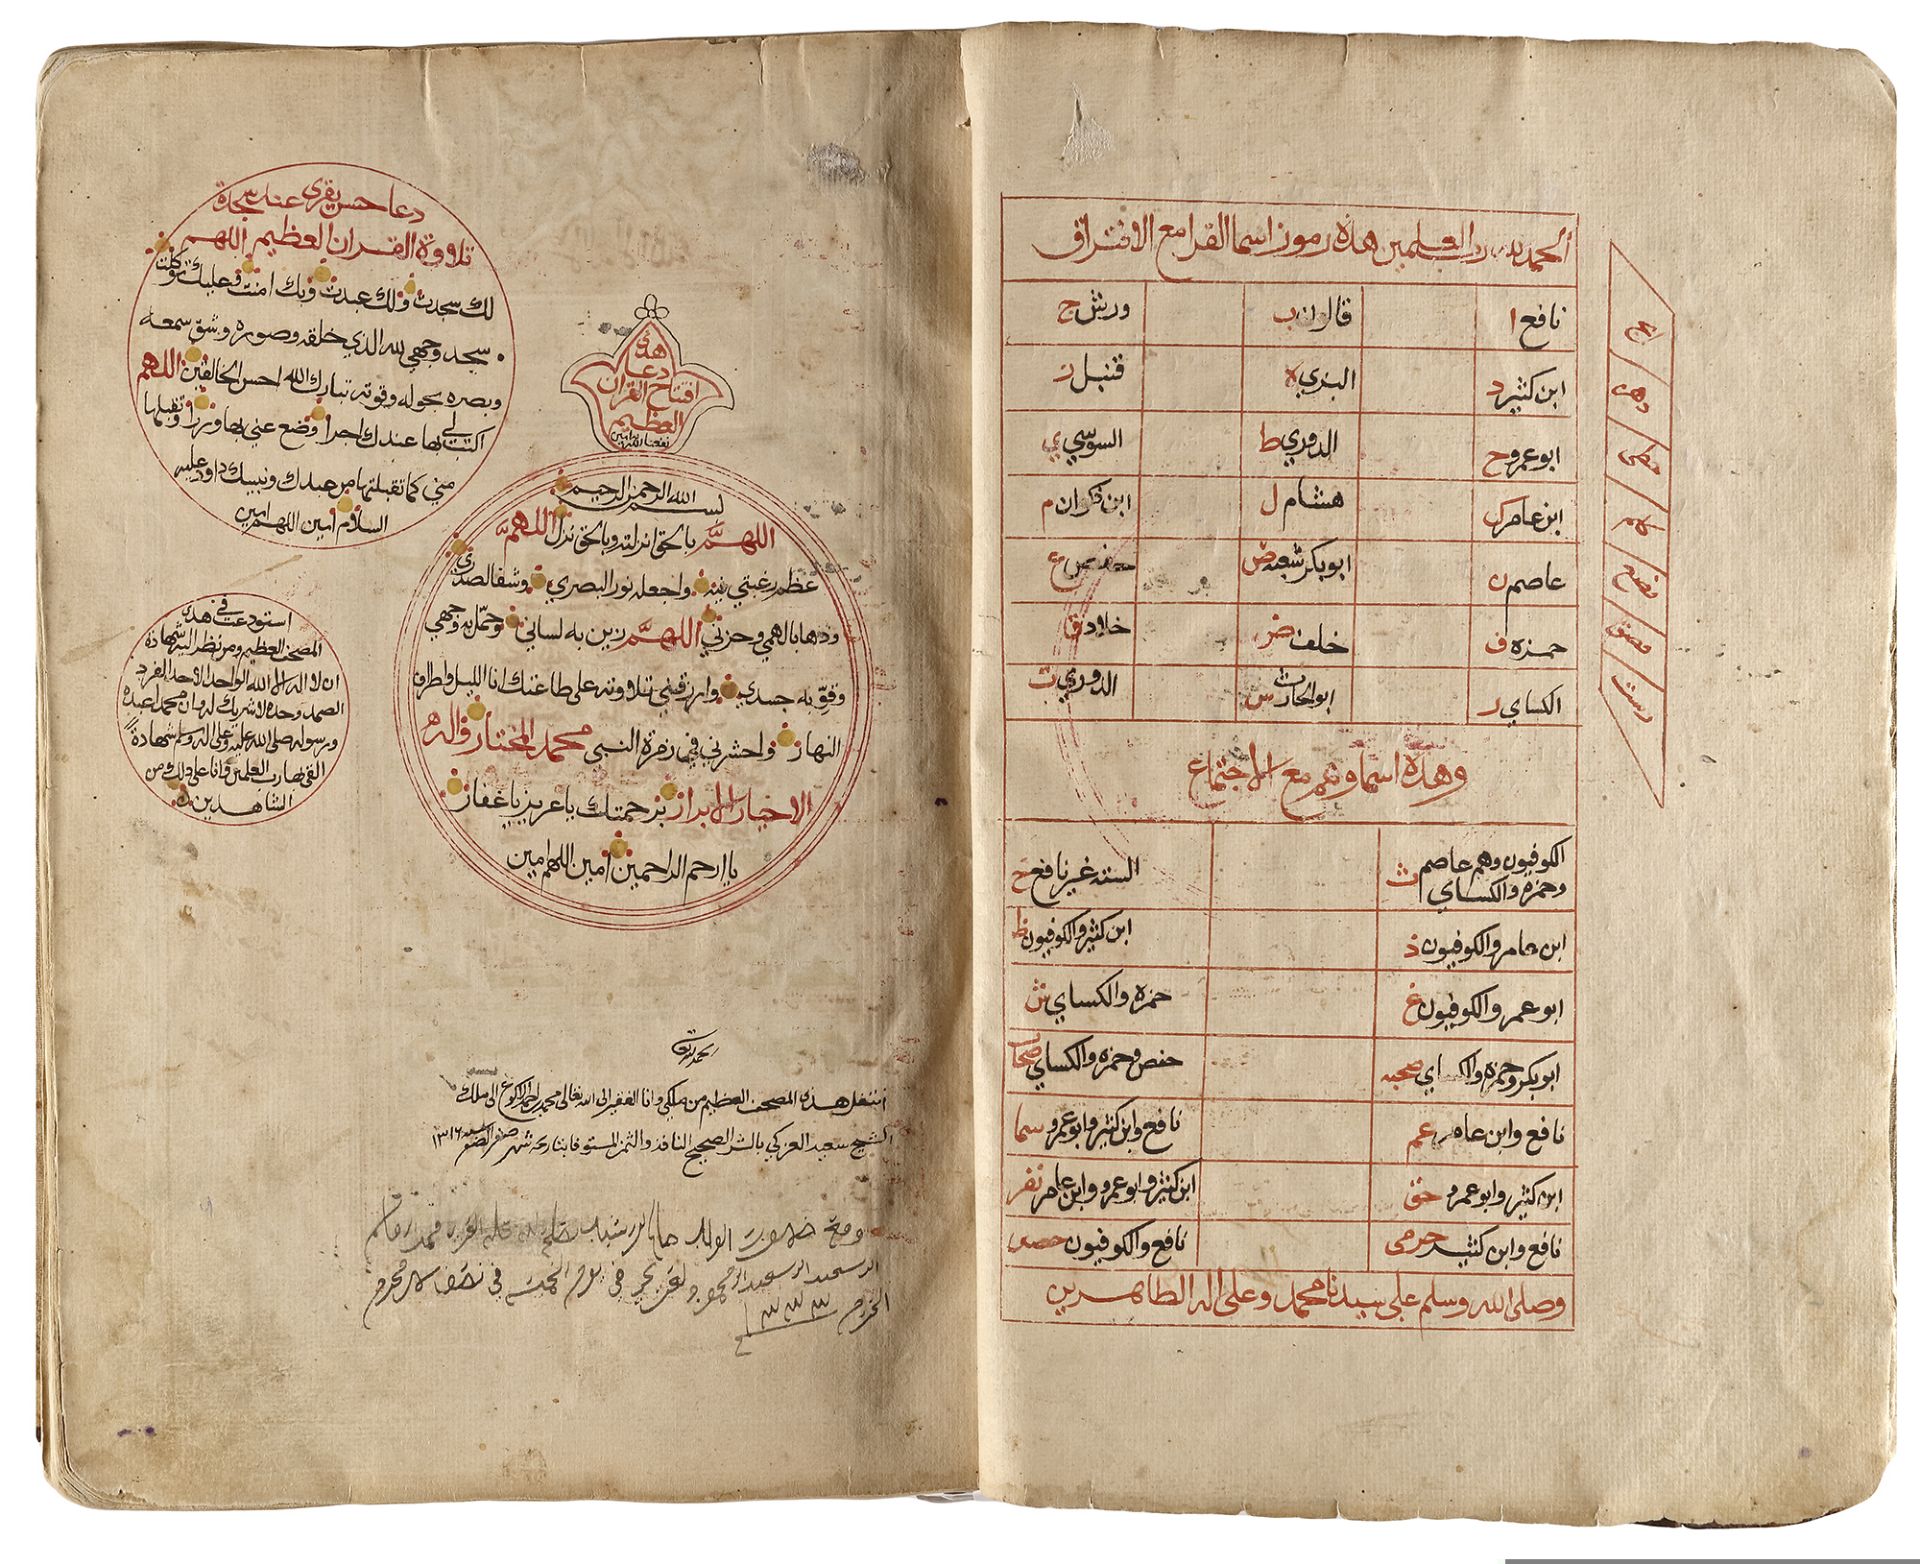 AN ILLUMINATED QURAN, YEMEN, BY AHMED QASEM IBN ISMAIL IN 1035 AH/1626 AD - Image 9 of 18